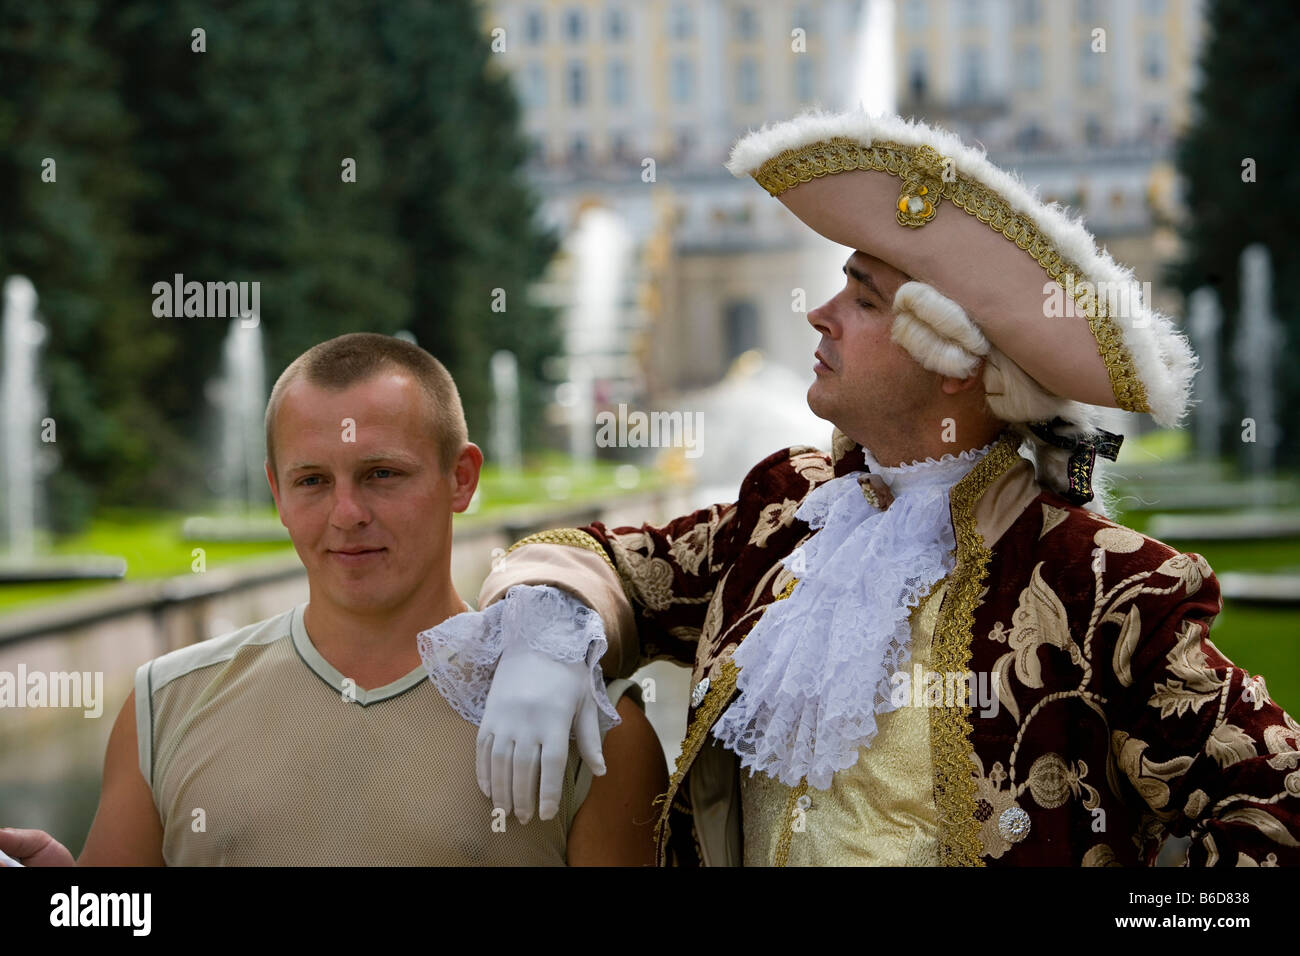 Russia, Saint Petersburg, Peterhof, Parks and castles. Visitor and man in traditional clothing Stock Photo